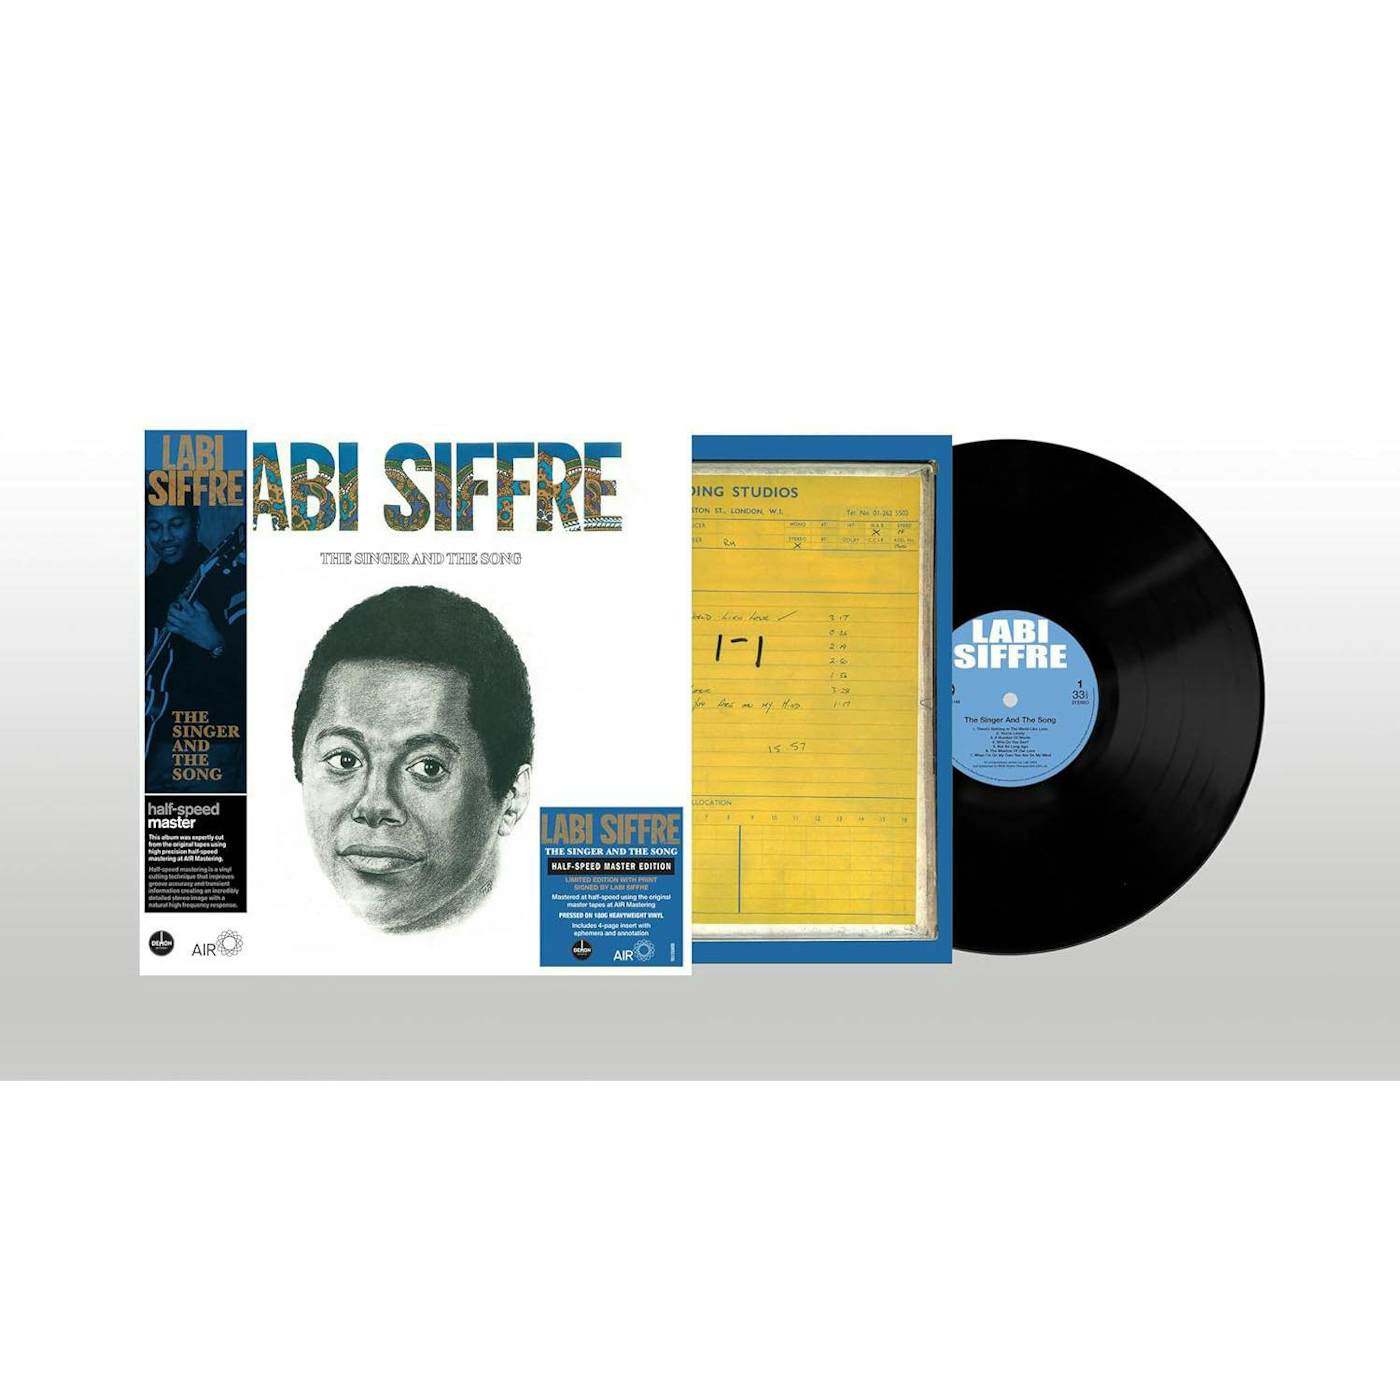 Labi Siffre Singer & The Song [Half-speed Master Edition/180G) Vinyl Record